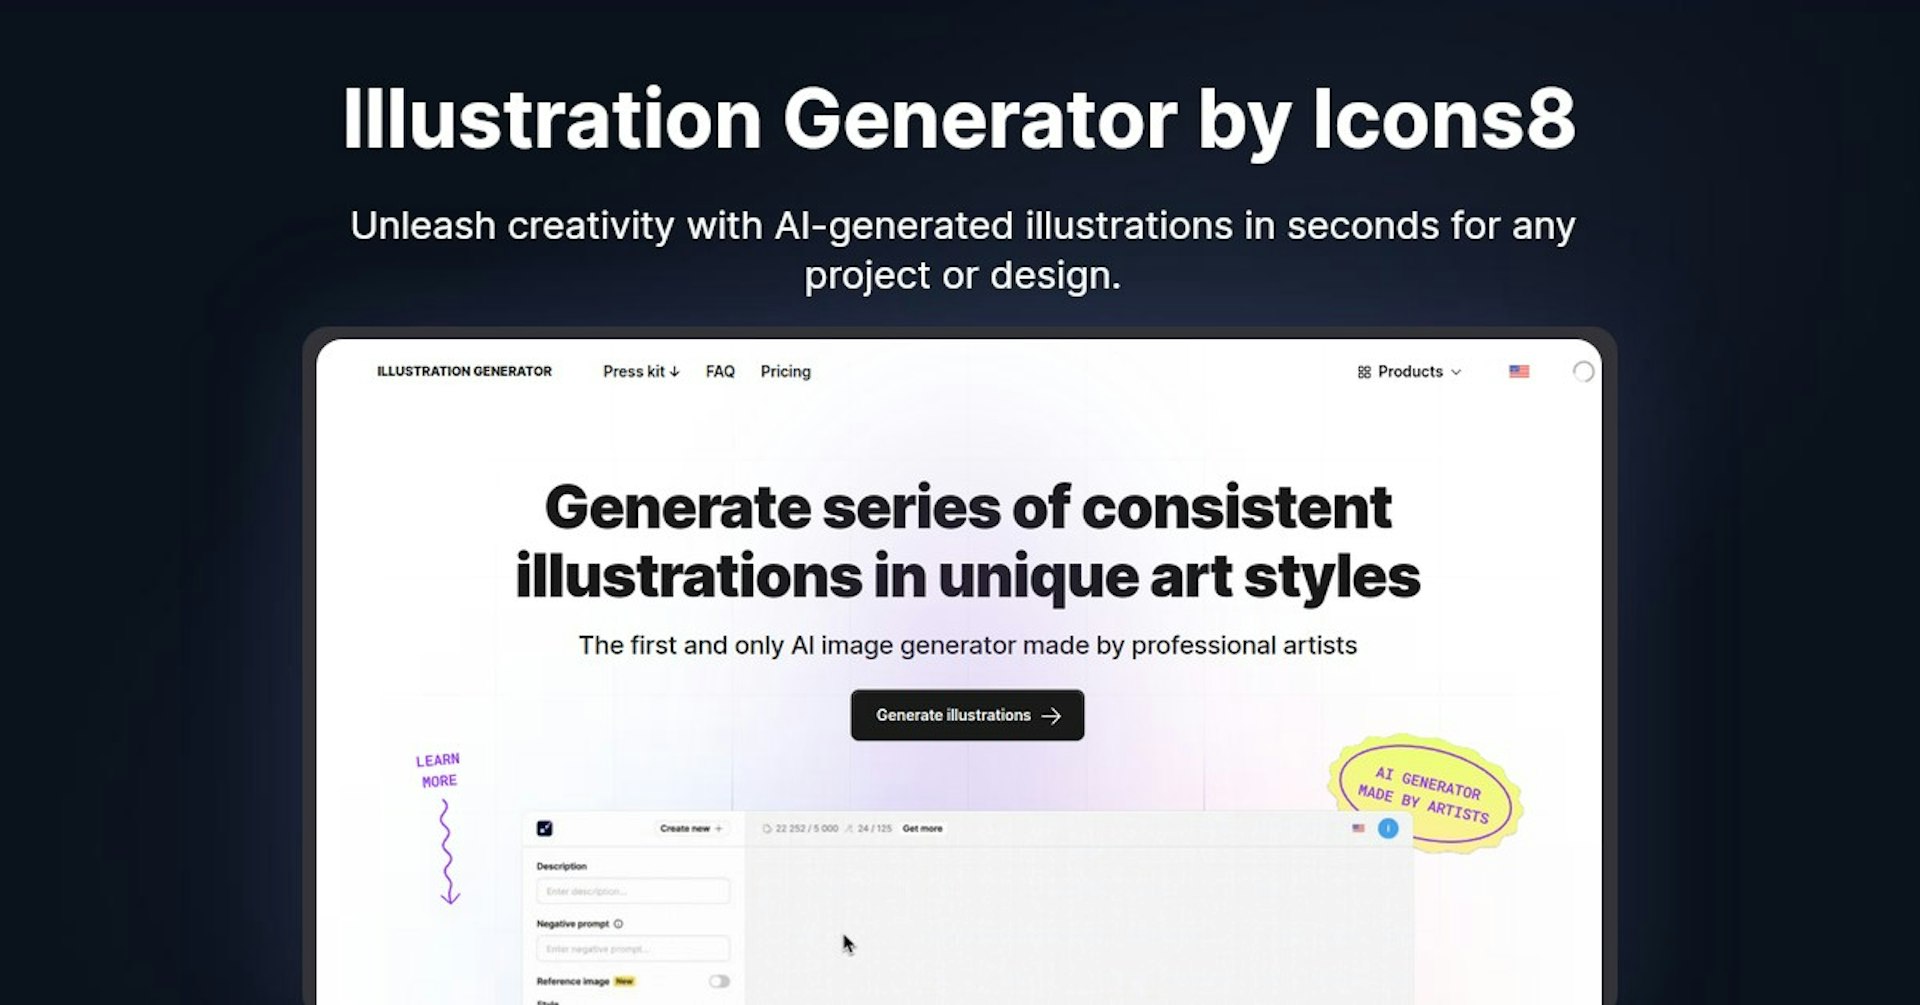 Illustration Generator by Icons8